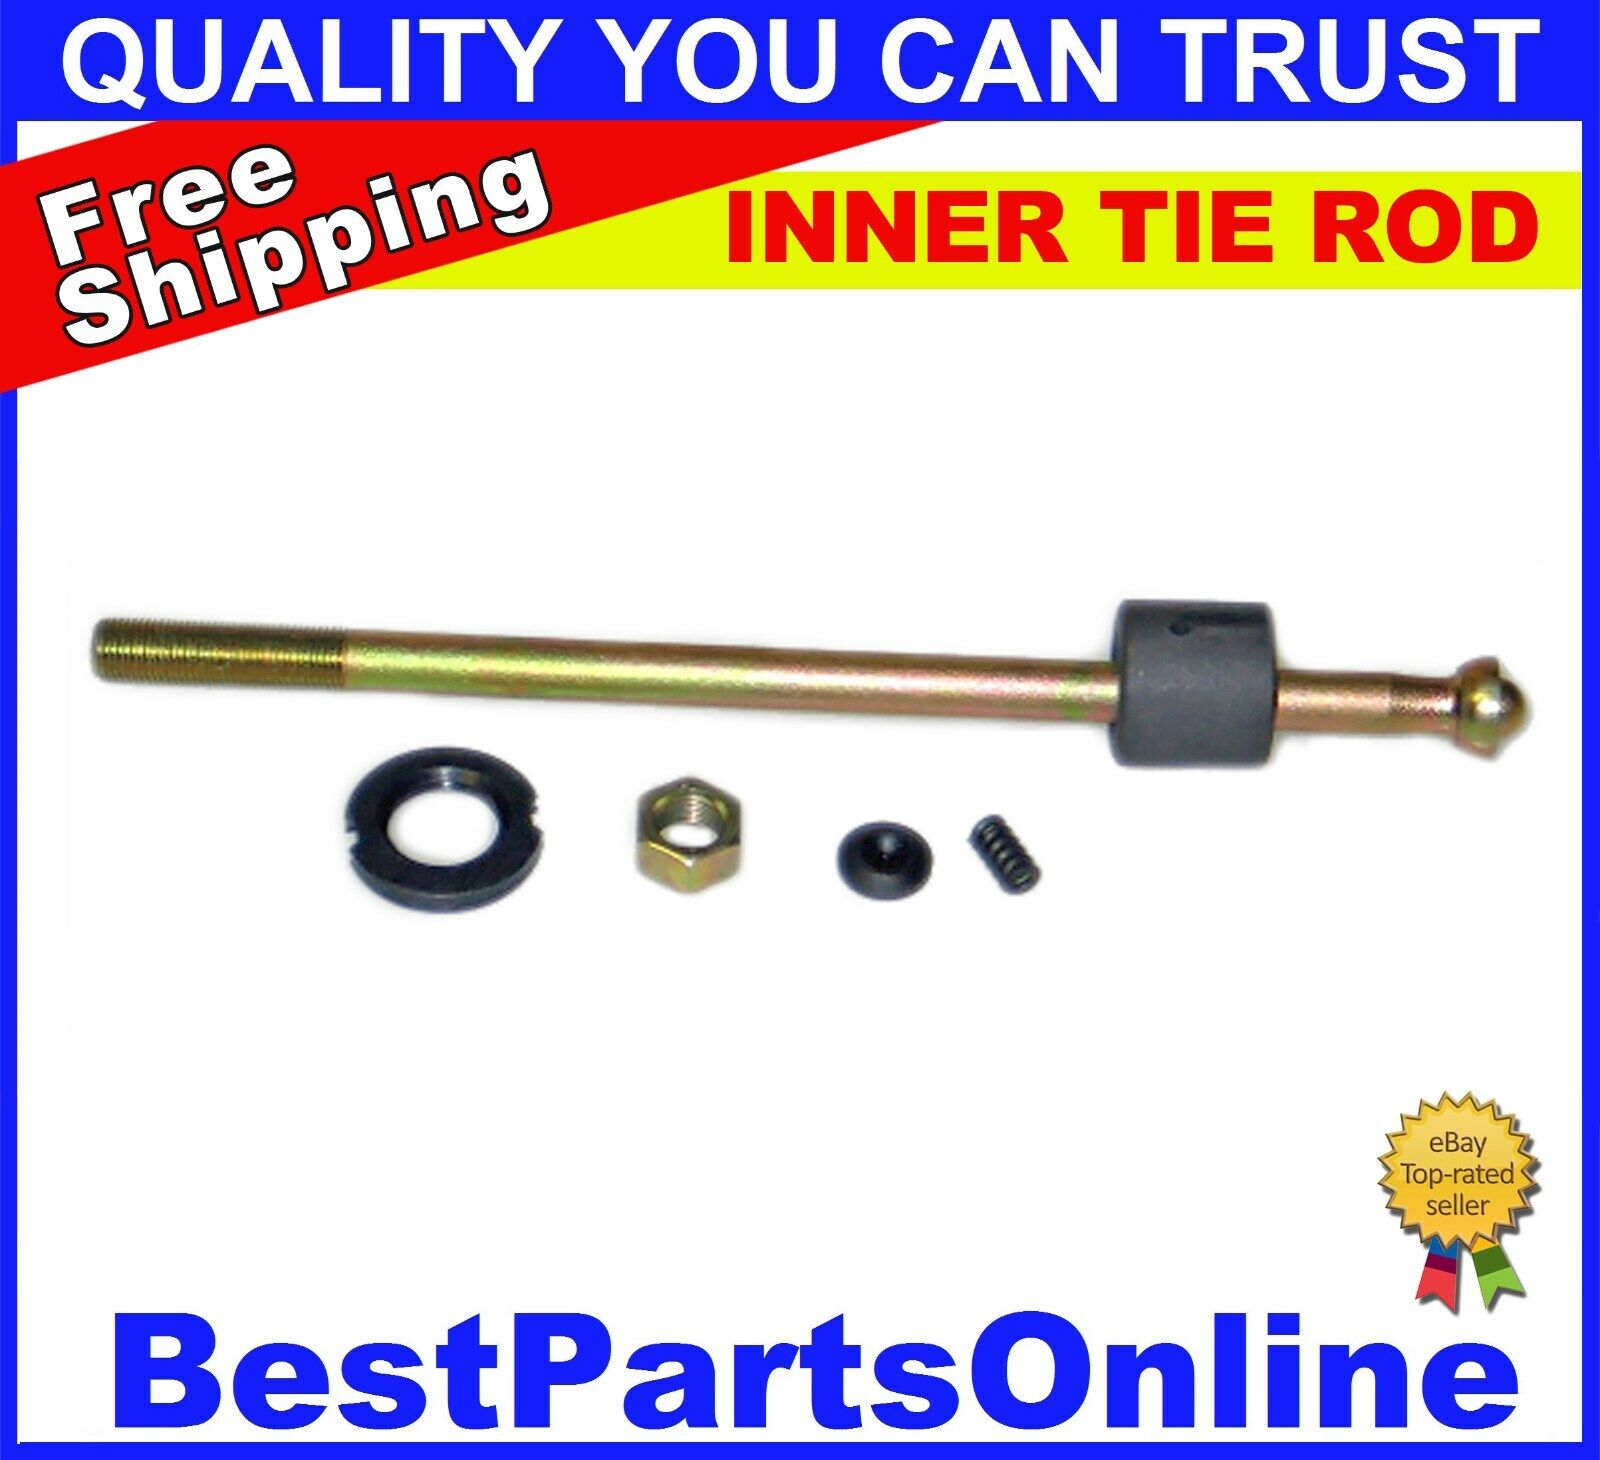 NEW Inner Tie Rod End for Ford Pinto 1971-1972 Ford Pinto Manual